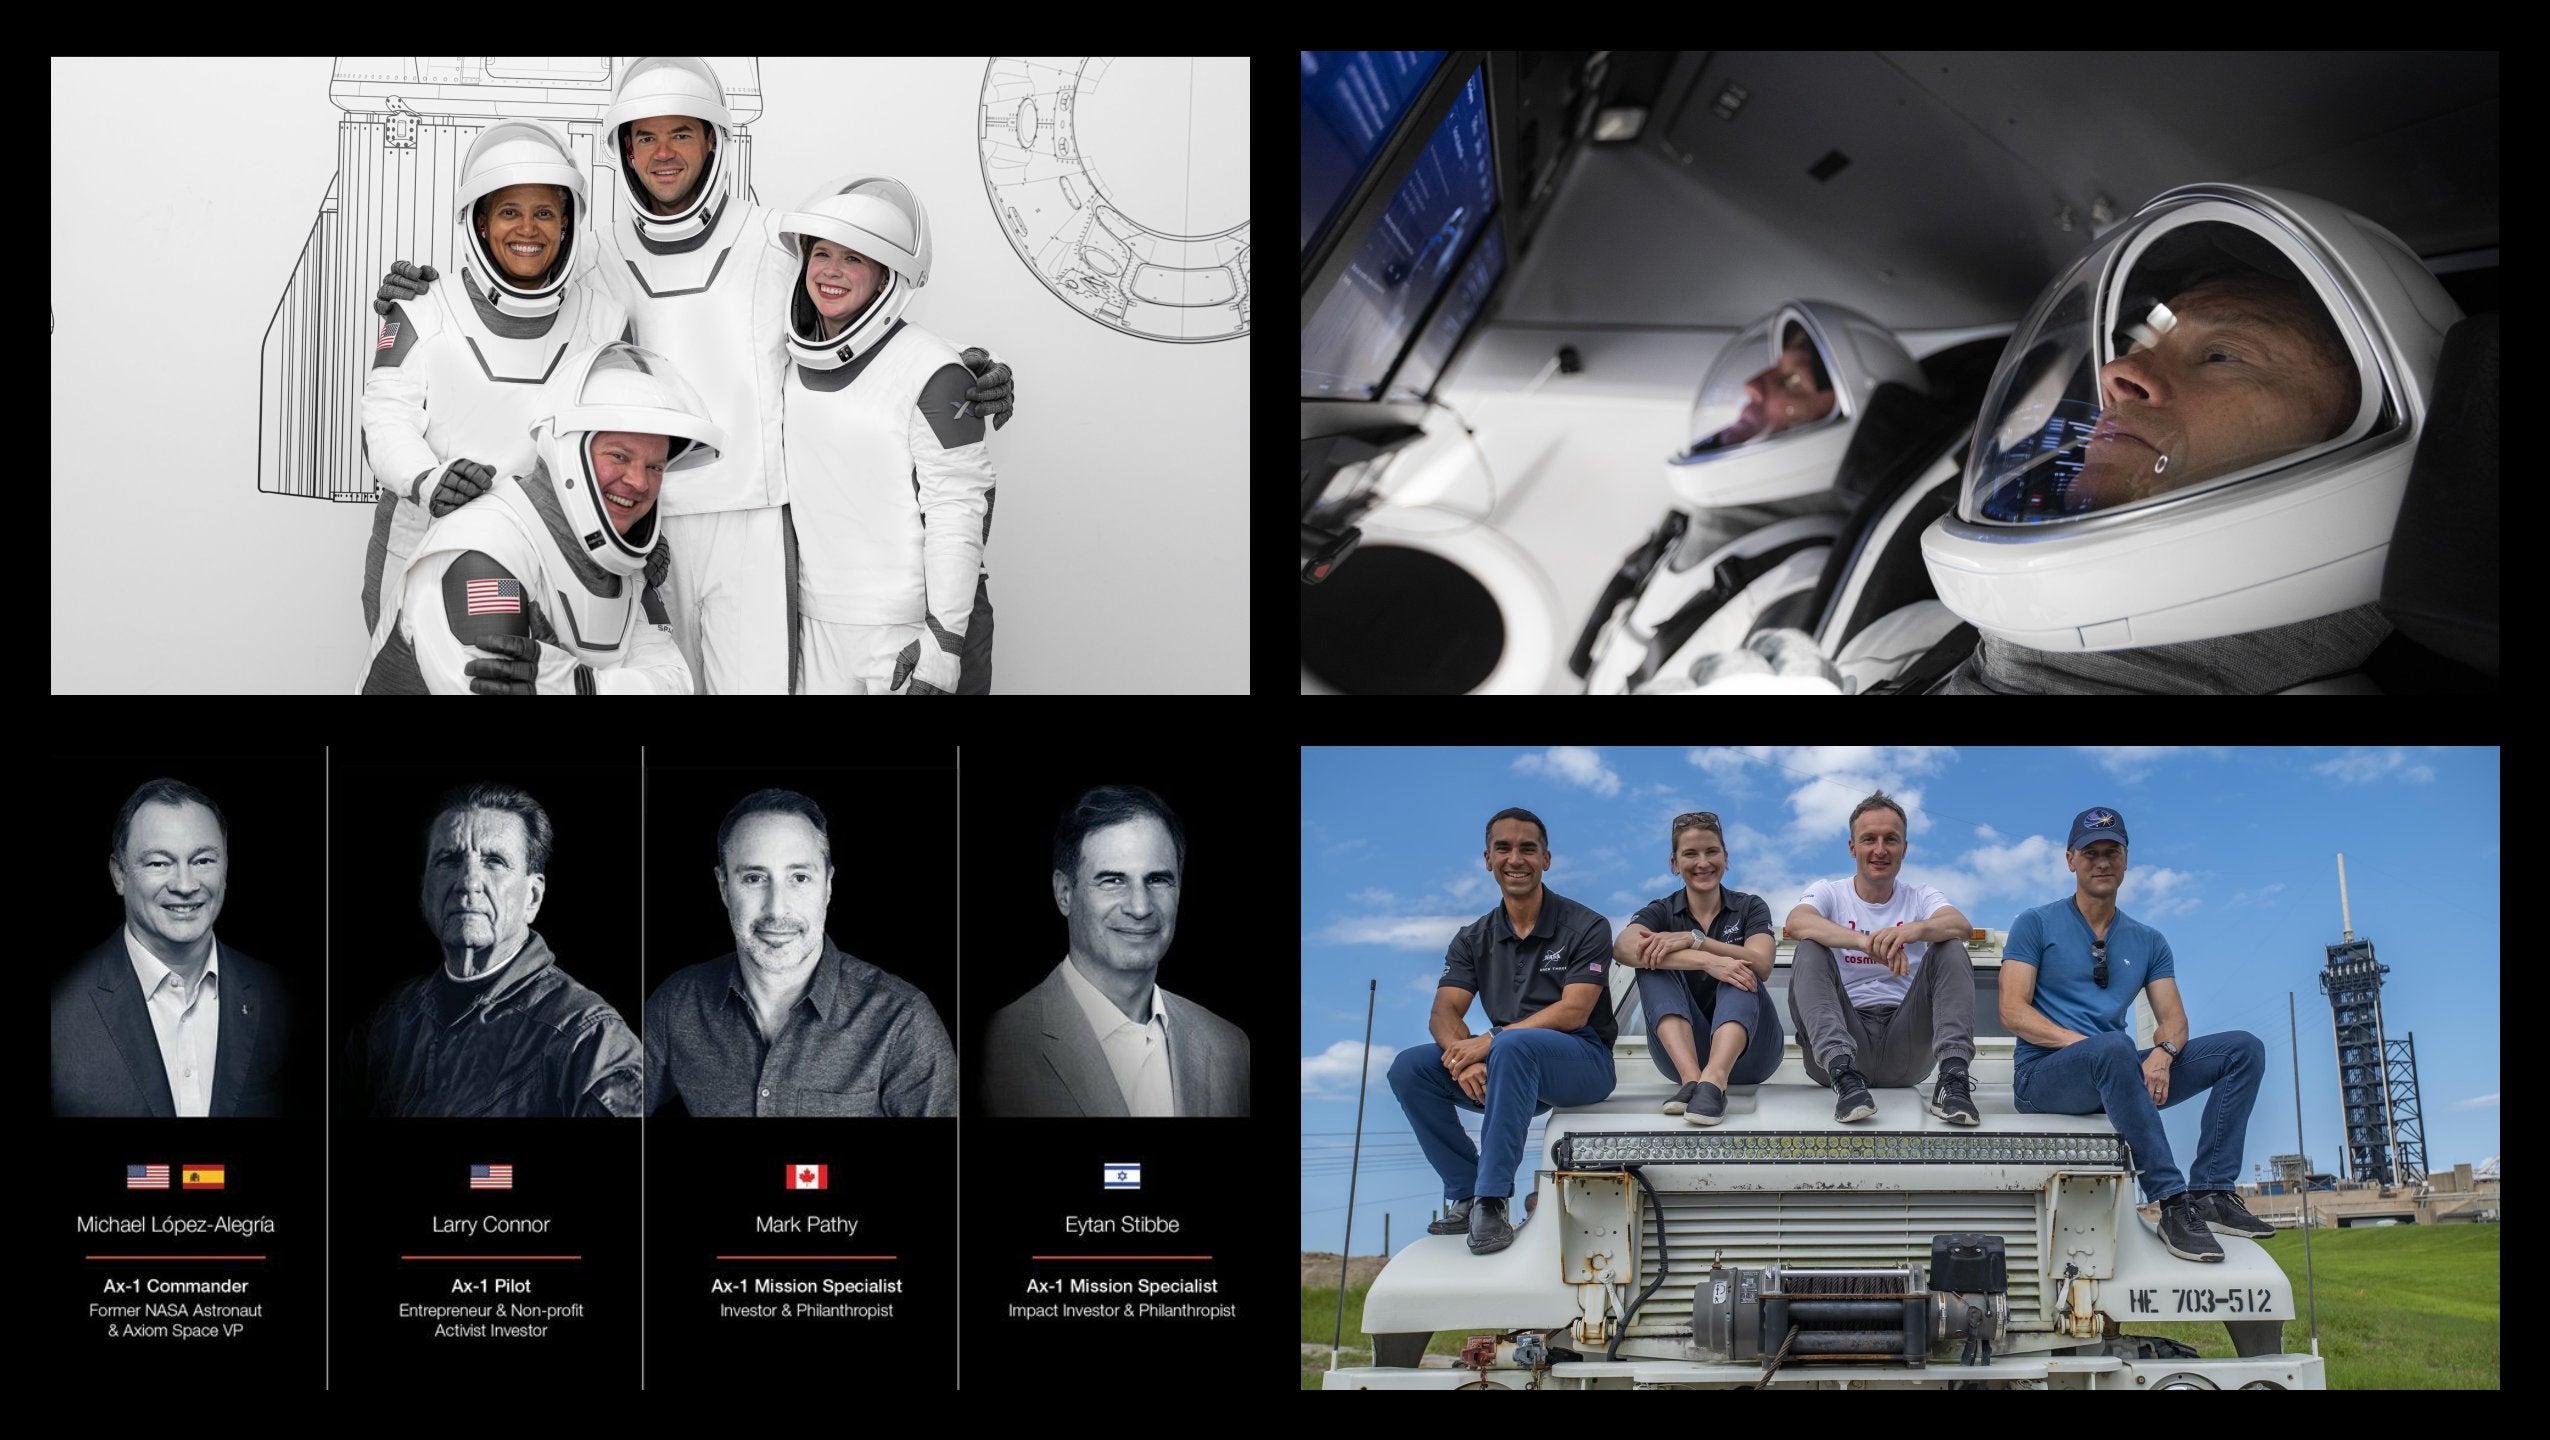 More Than 20 SpaceX Astronauts Are Training To Liftoff Aboard Upcoming Missions!